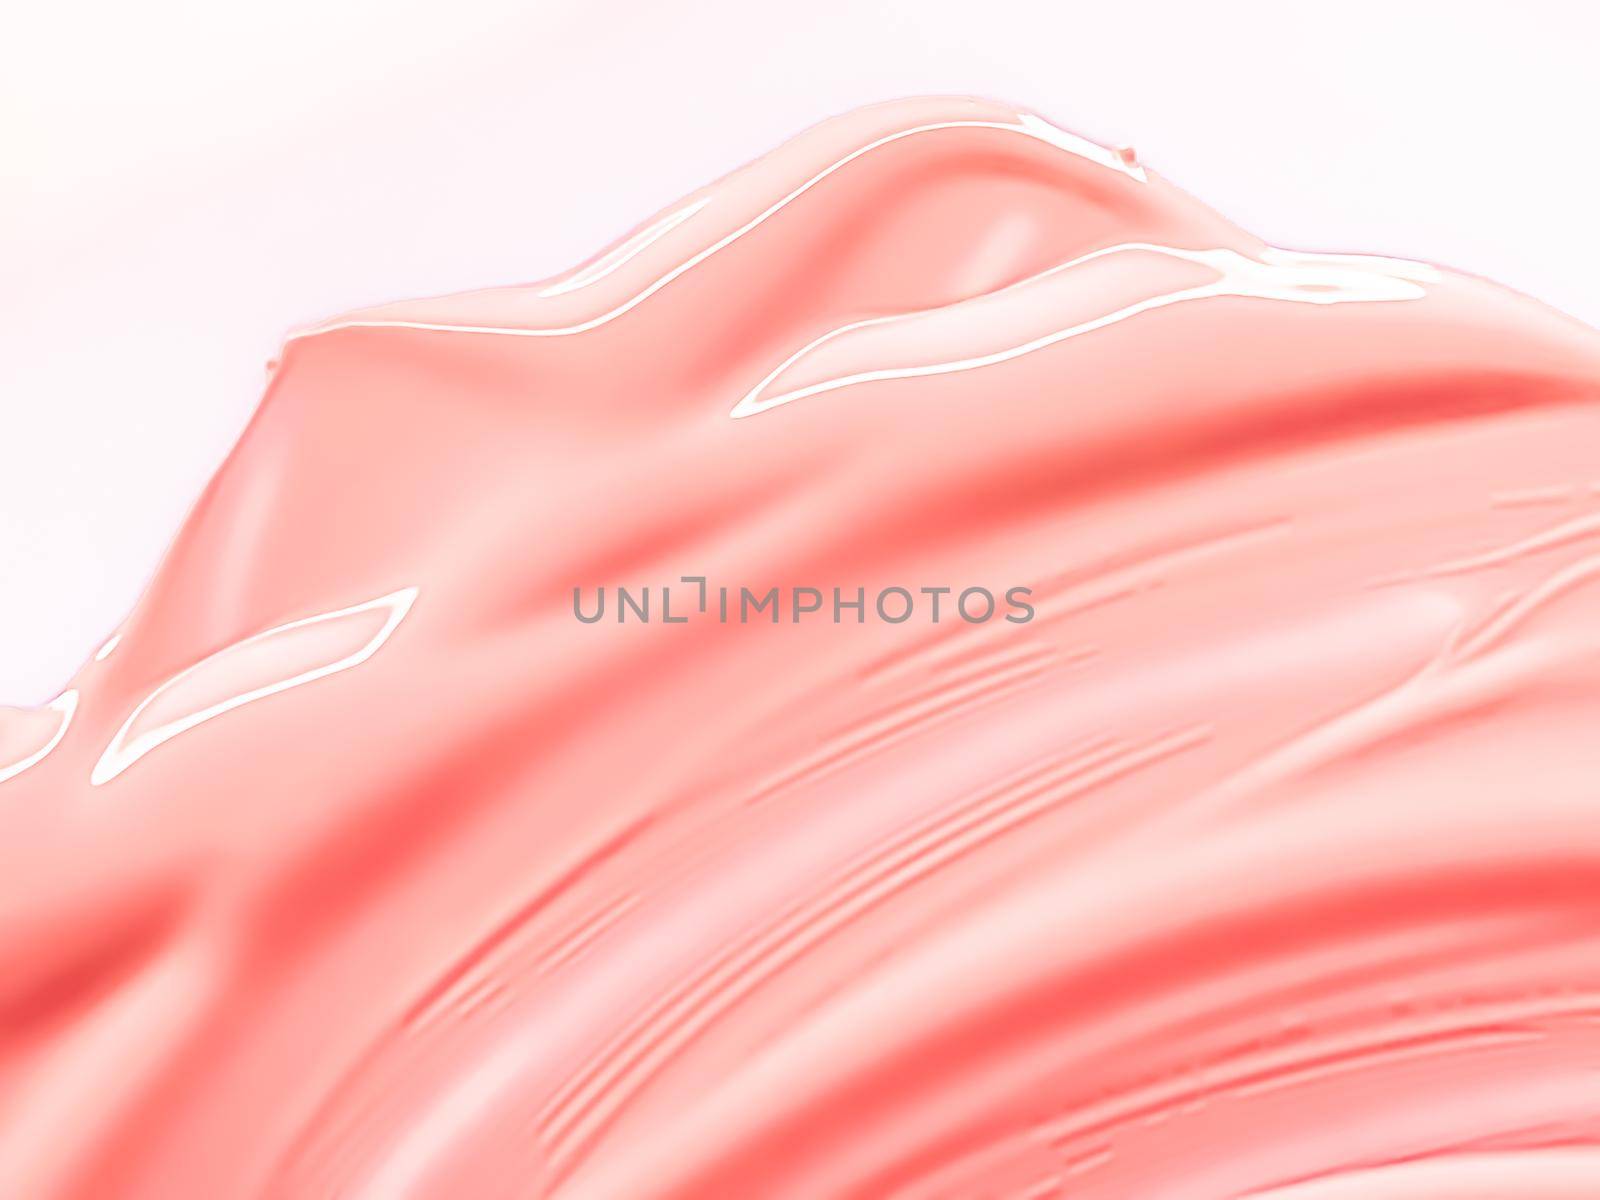 Glossy coral cosmetic texture as beauty make-up product background, skincare cosmetics and luxury makeup brand design by Anneleven